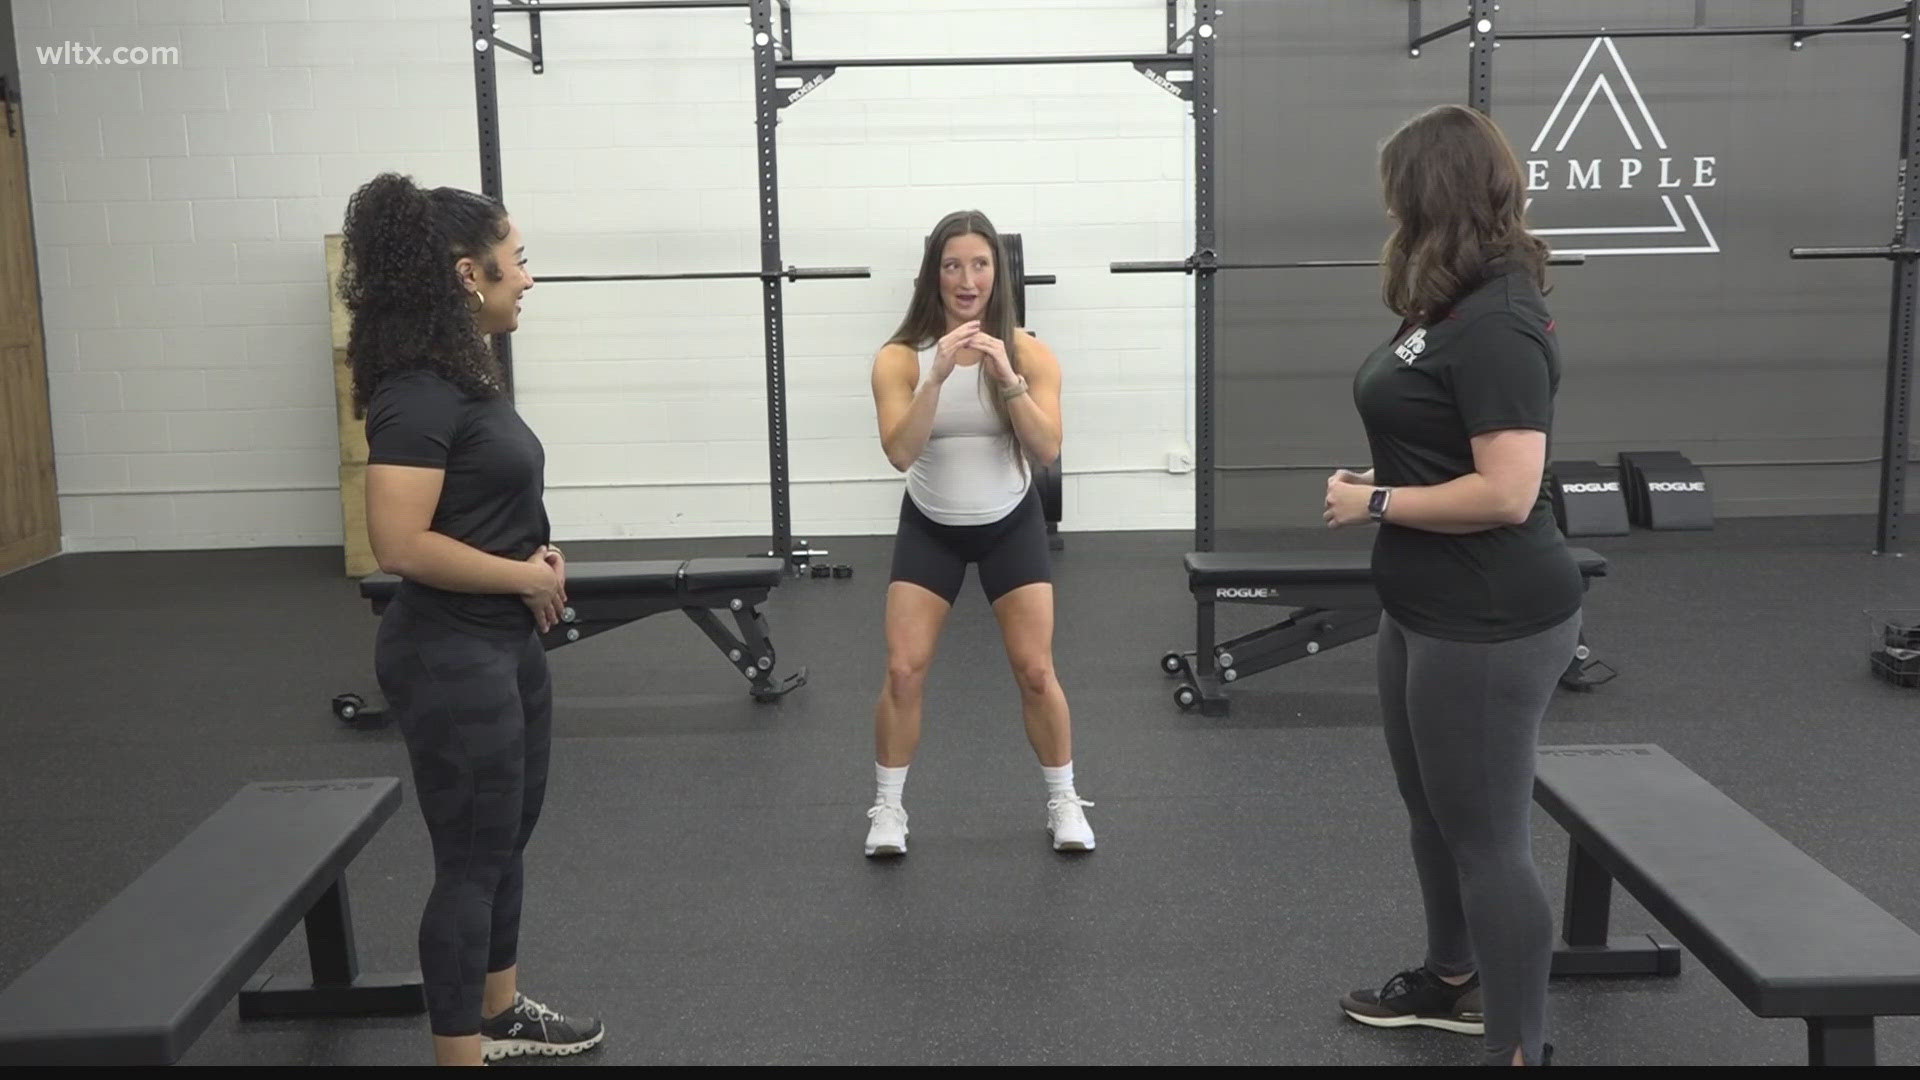 In a workout you can do at home, an expert shows how to master squats.